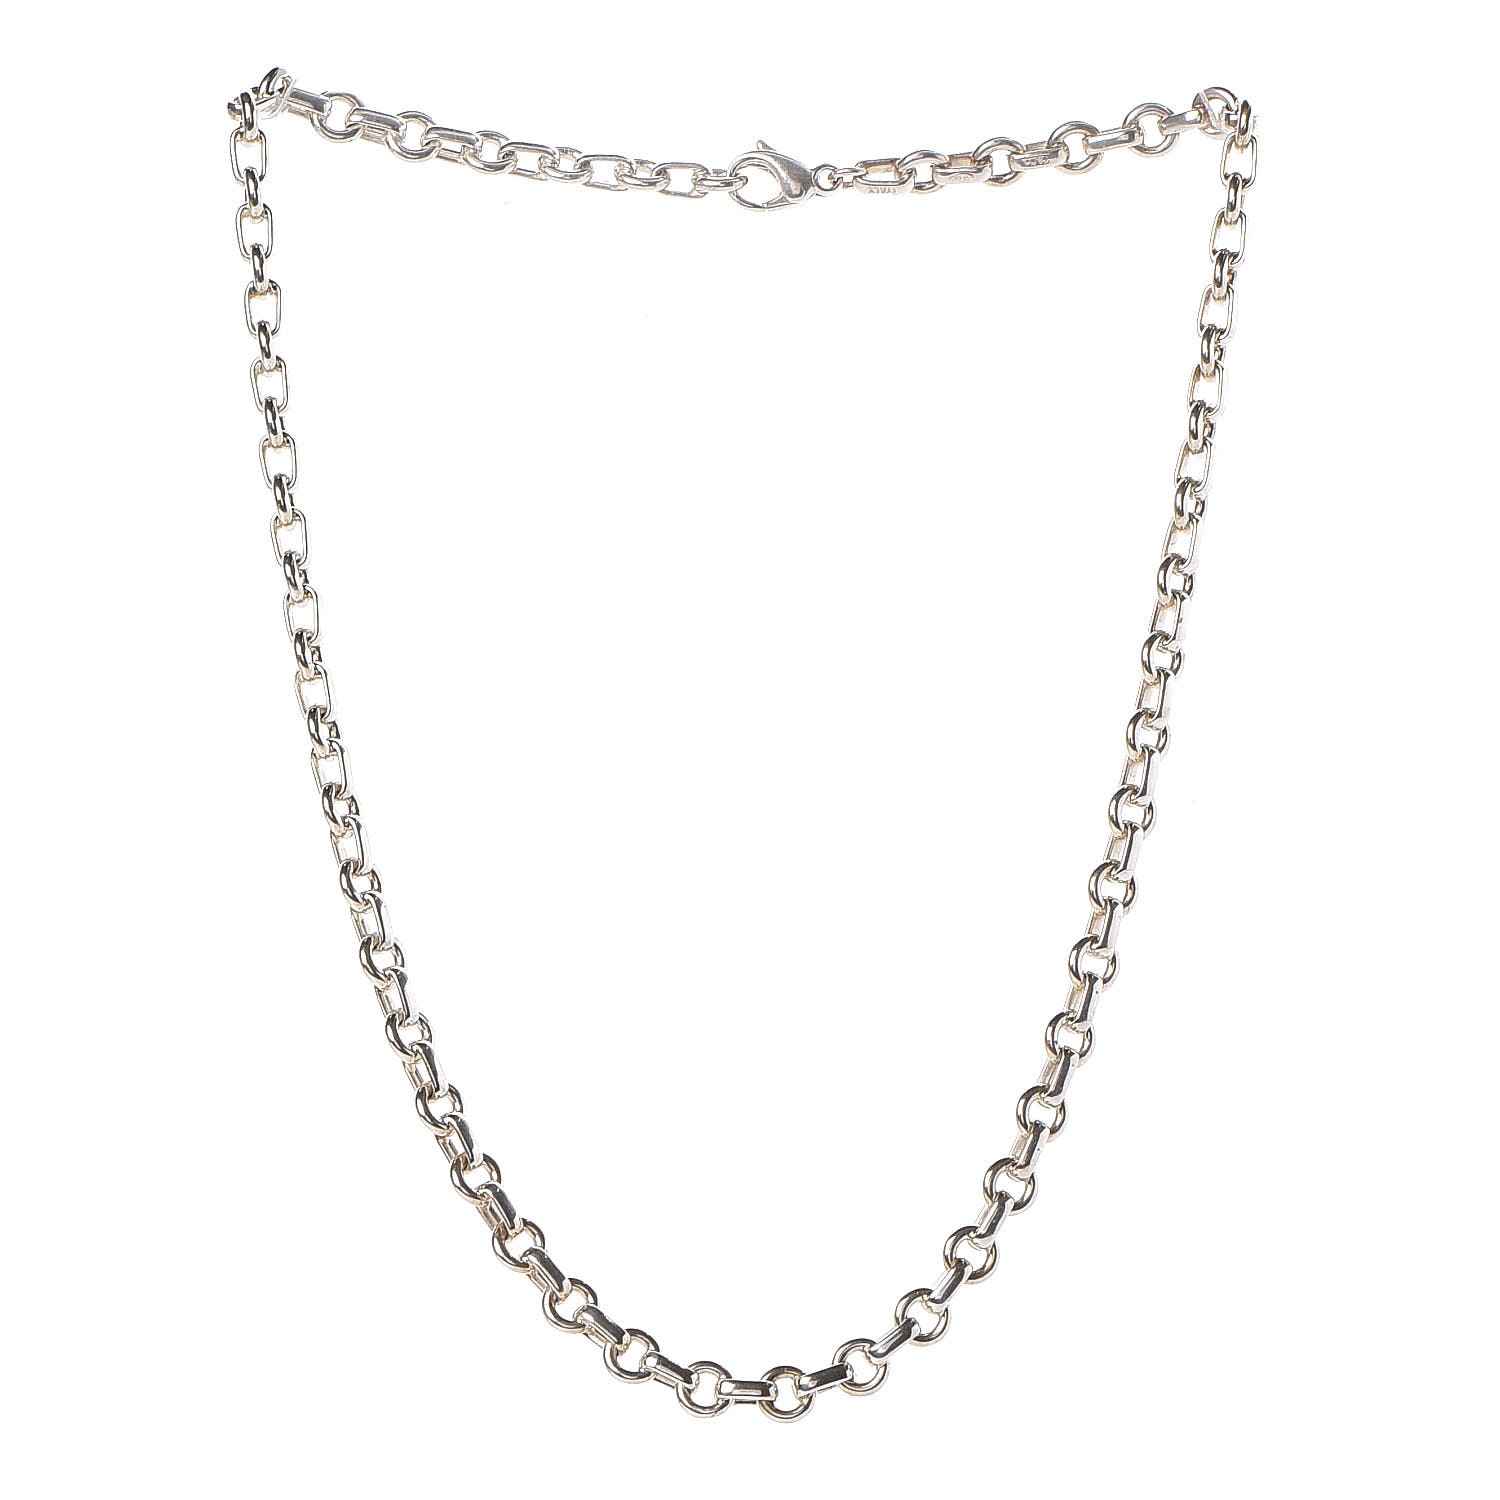 TIFFANY Sterling Silver Chain Necklace 324330 | FASHIONPHILE